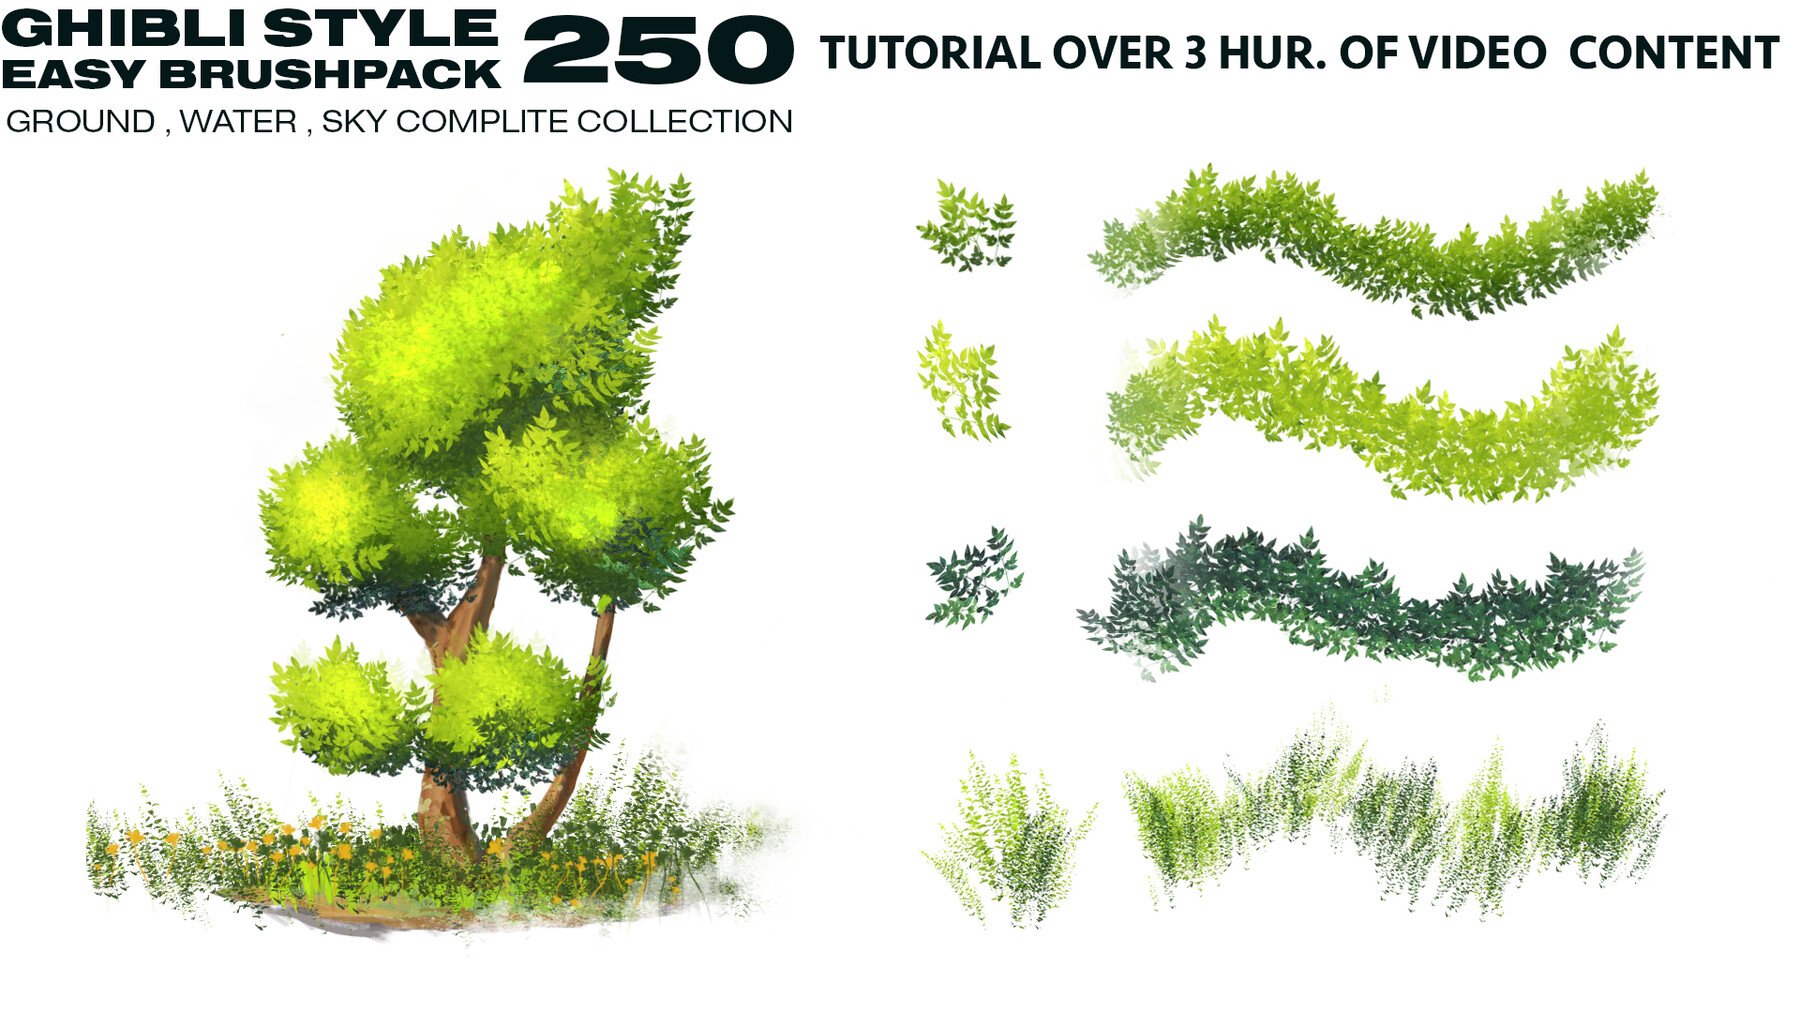 250 Ghibli Style Brush Pack and Tutorial